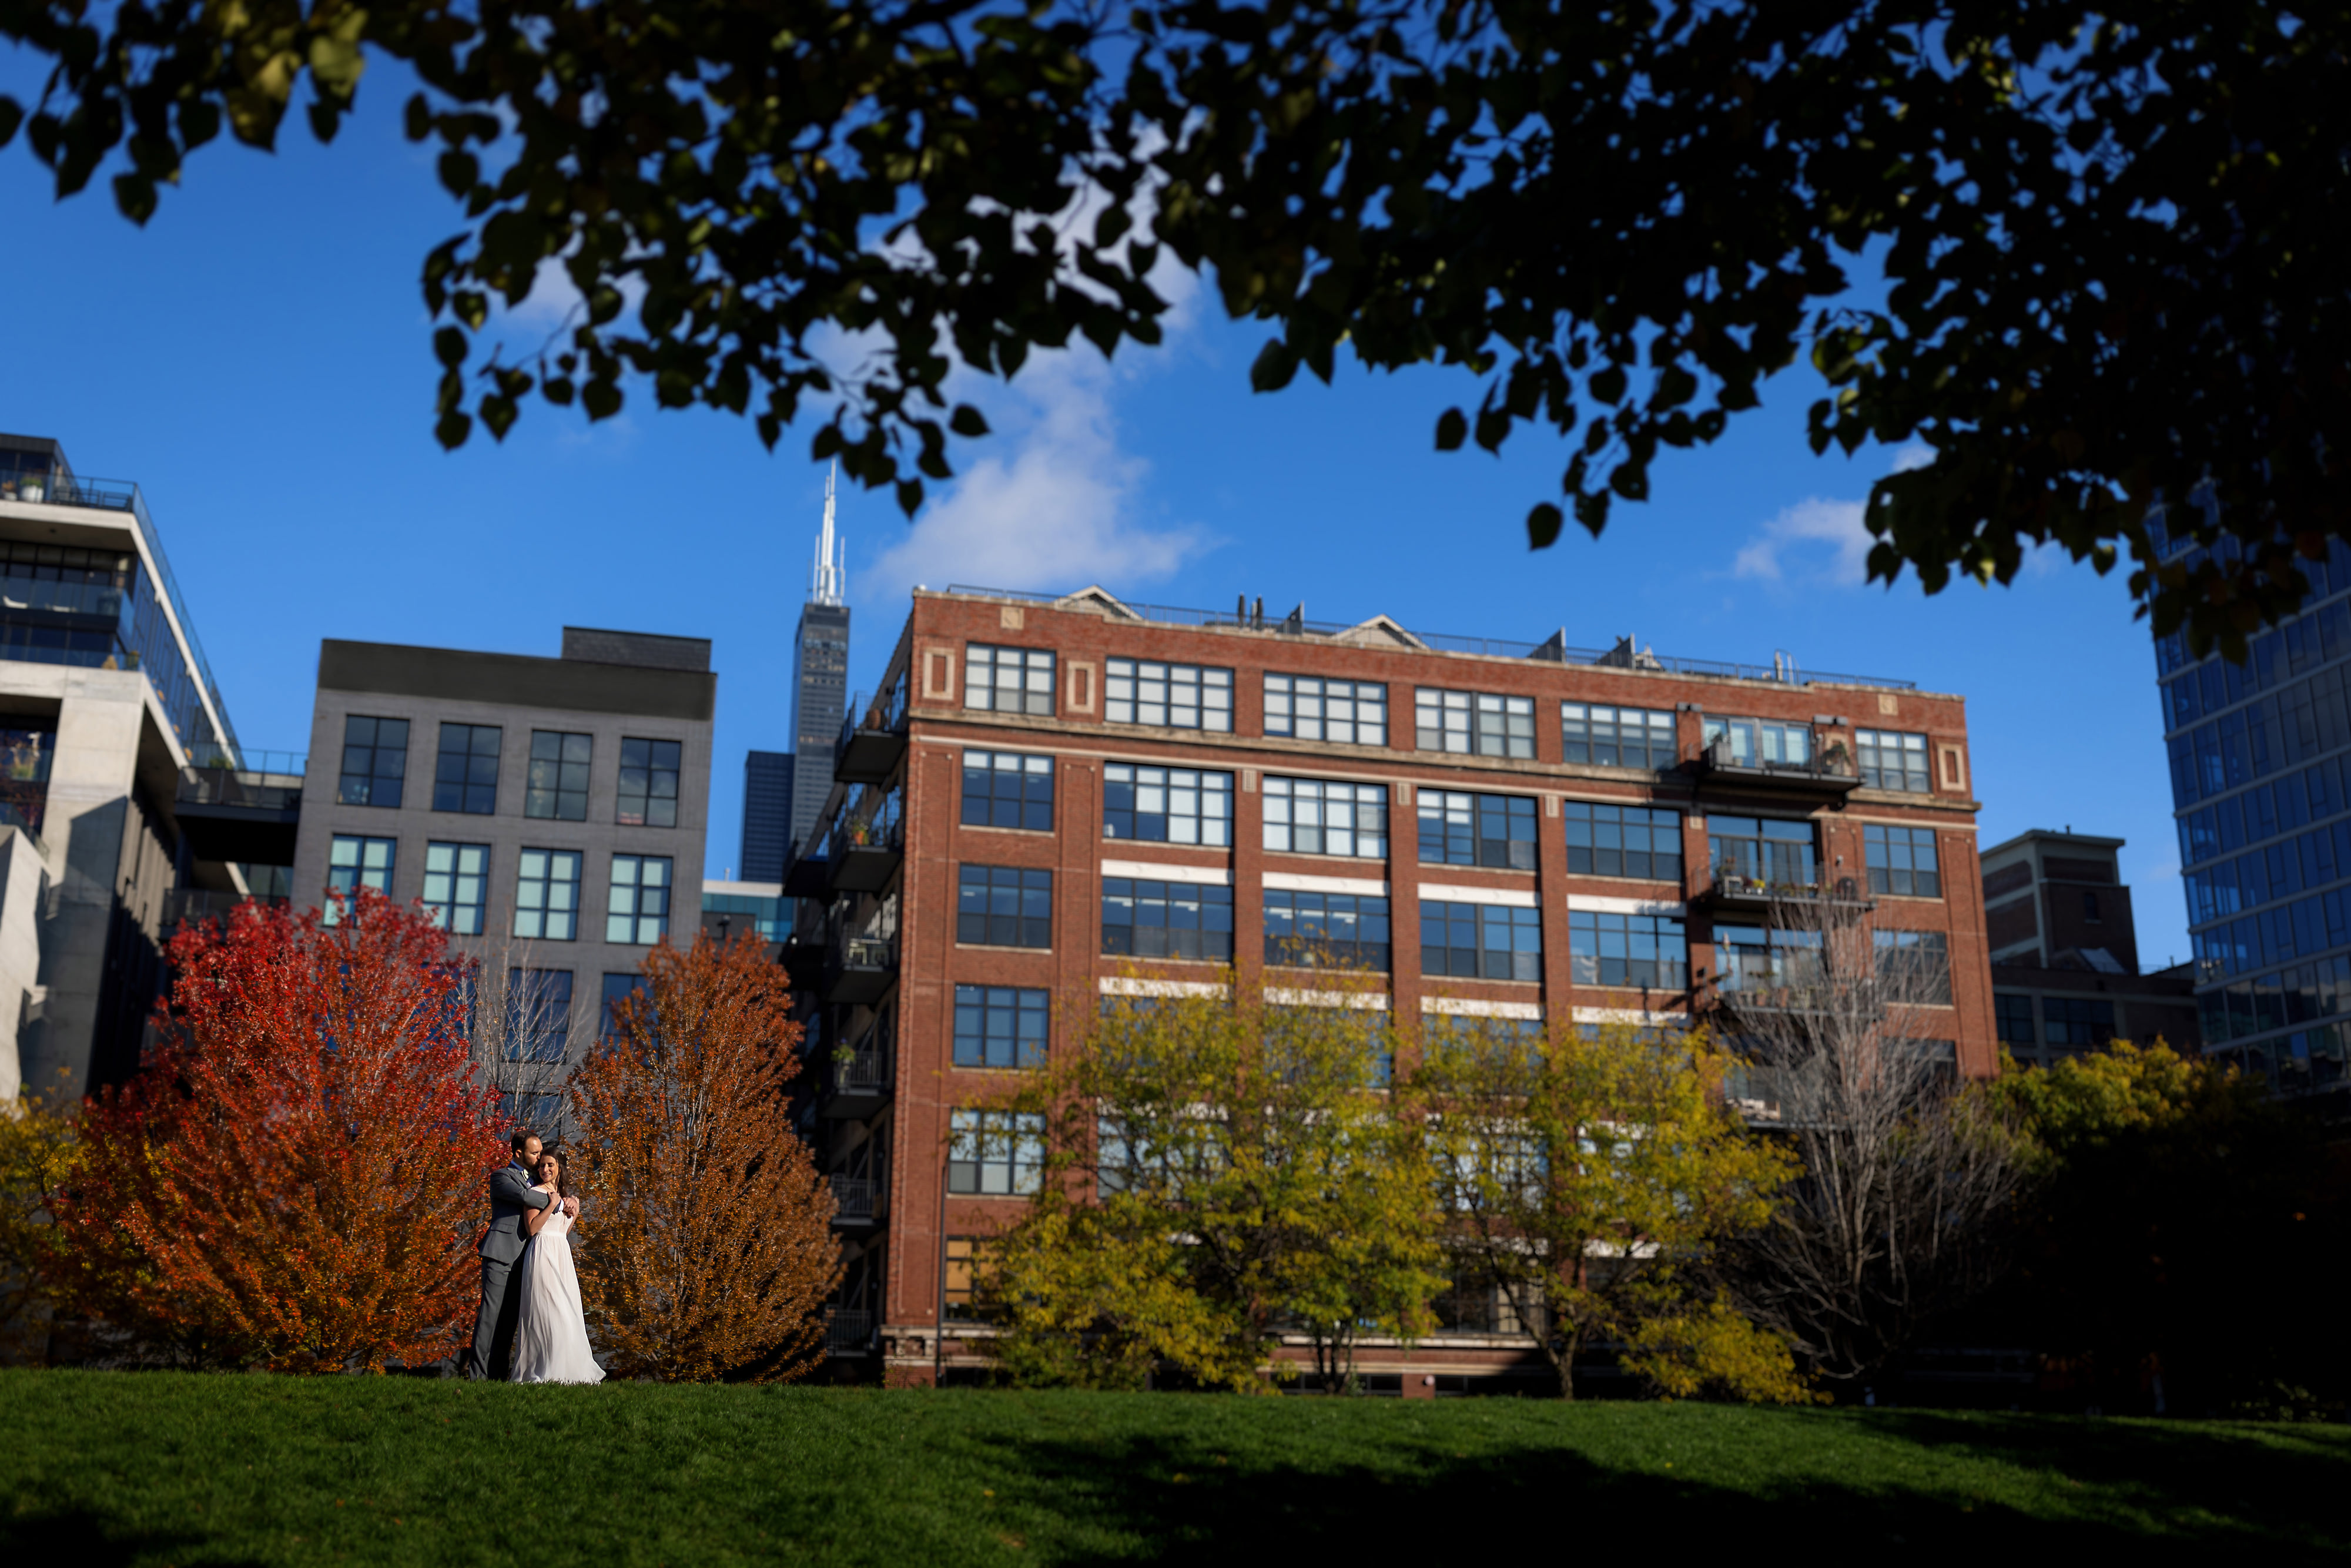 Bride and groom pose for wedding portrait at Mary Bartelme Park in Chicago's West Loop neighborhood.